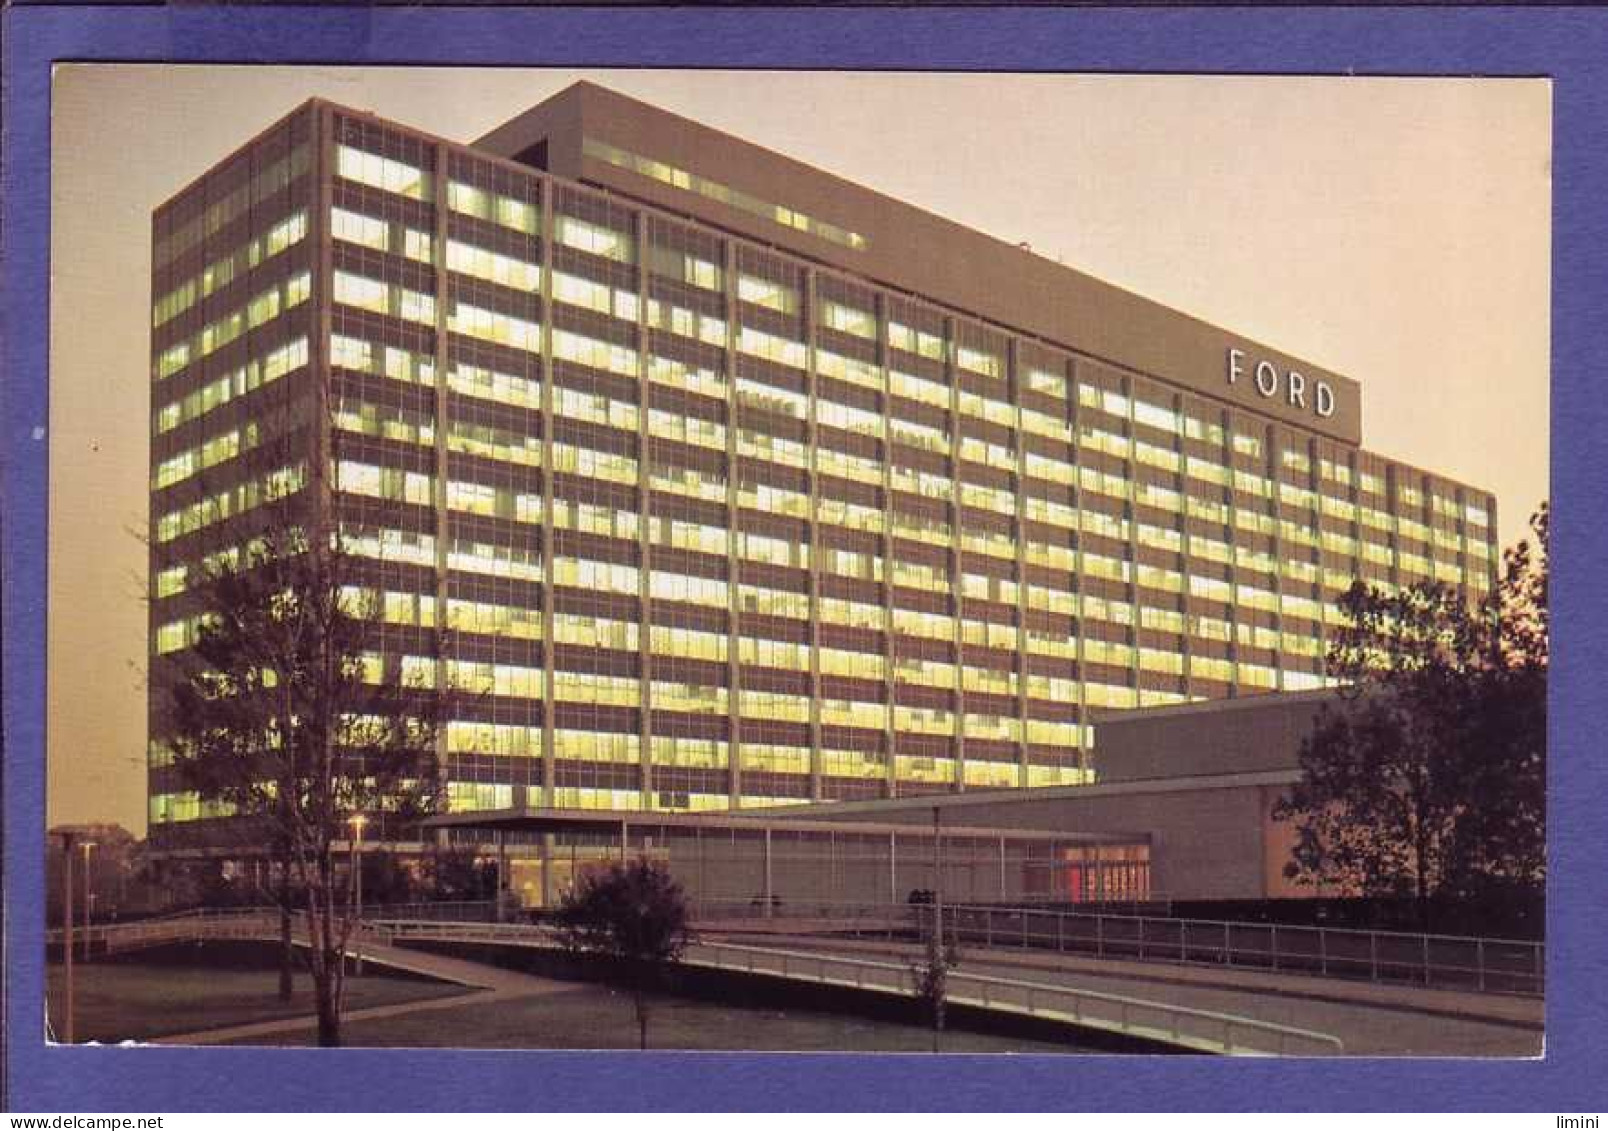 ÉTATS UNIS - MICHIGAN - DEARBORN - FORD MOTOR COMPANY CENTRAL OFFICE BUILDING -  - Dearborn